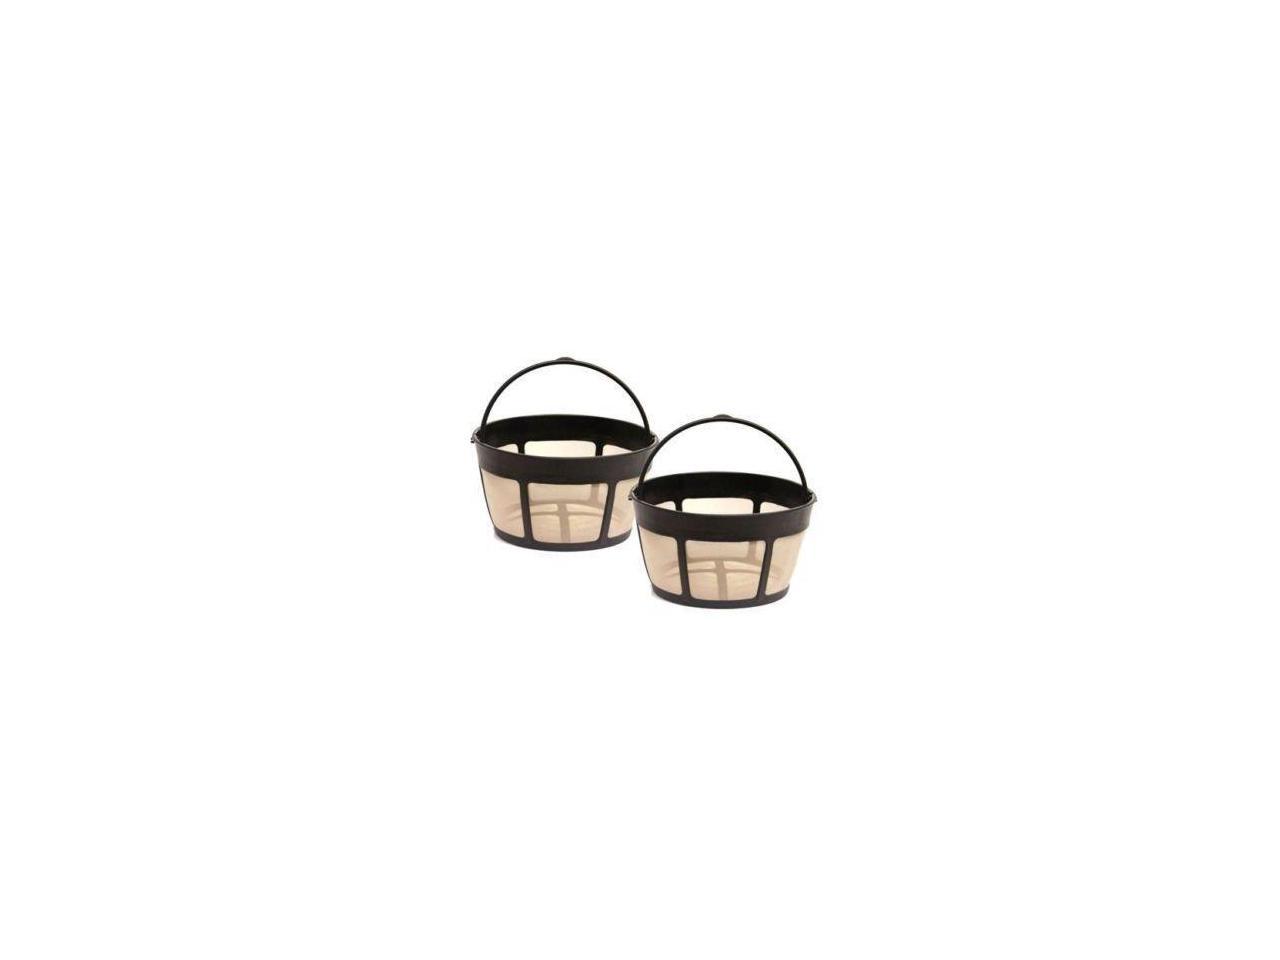 2 Pack Gtf-b Gold Tone Coffee Filter 8-12 Cup Permanent Basket Style 